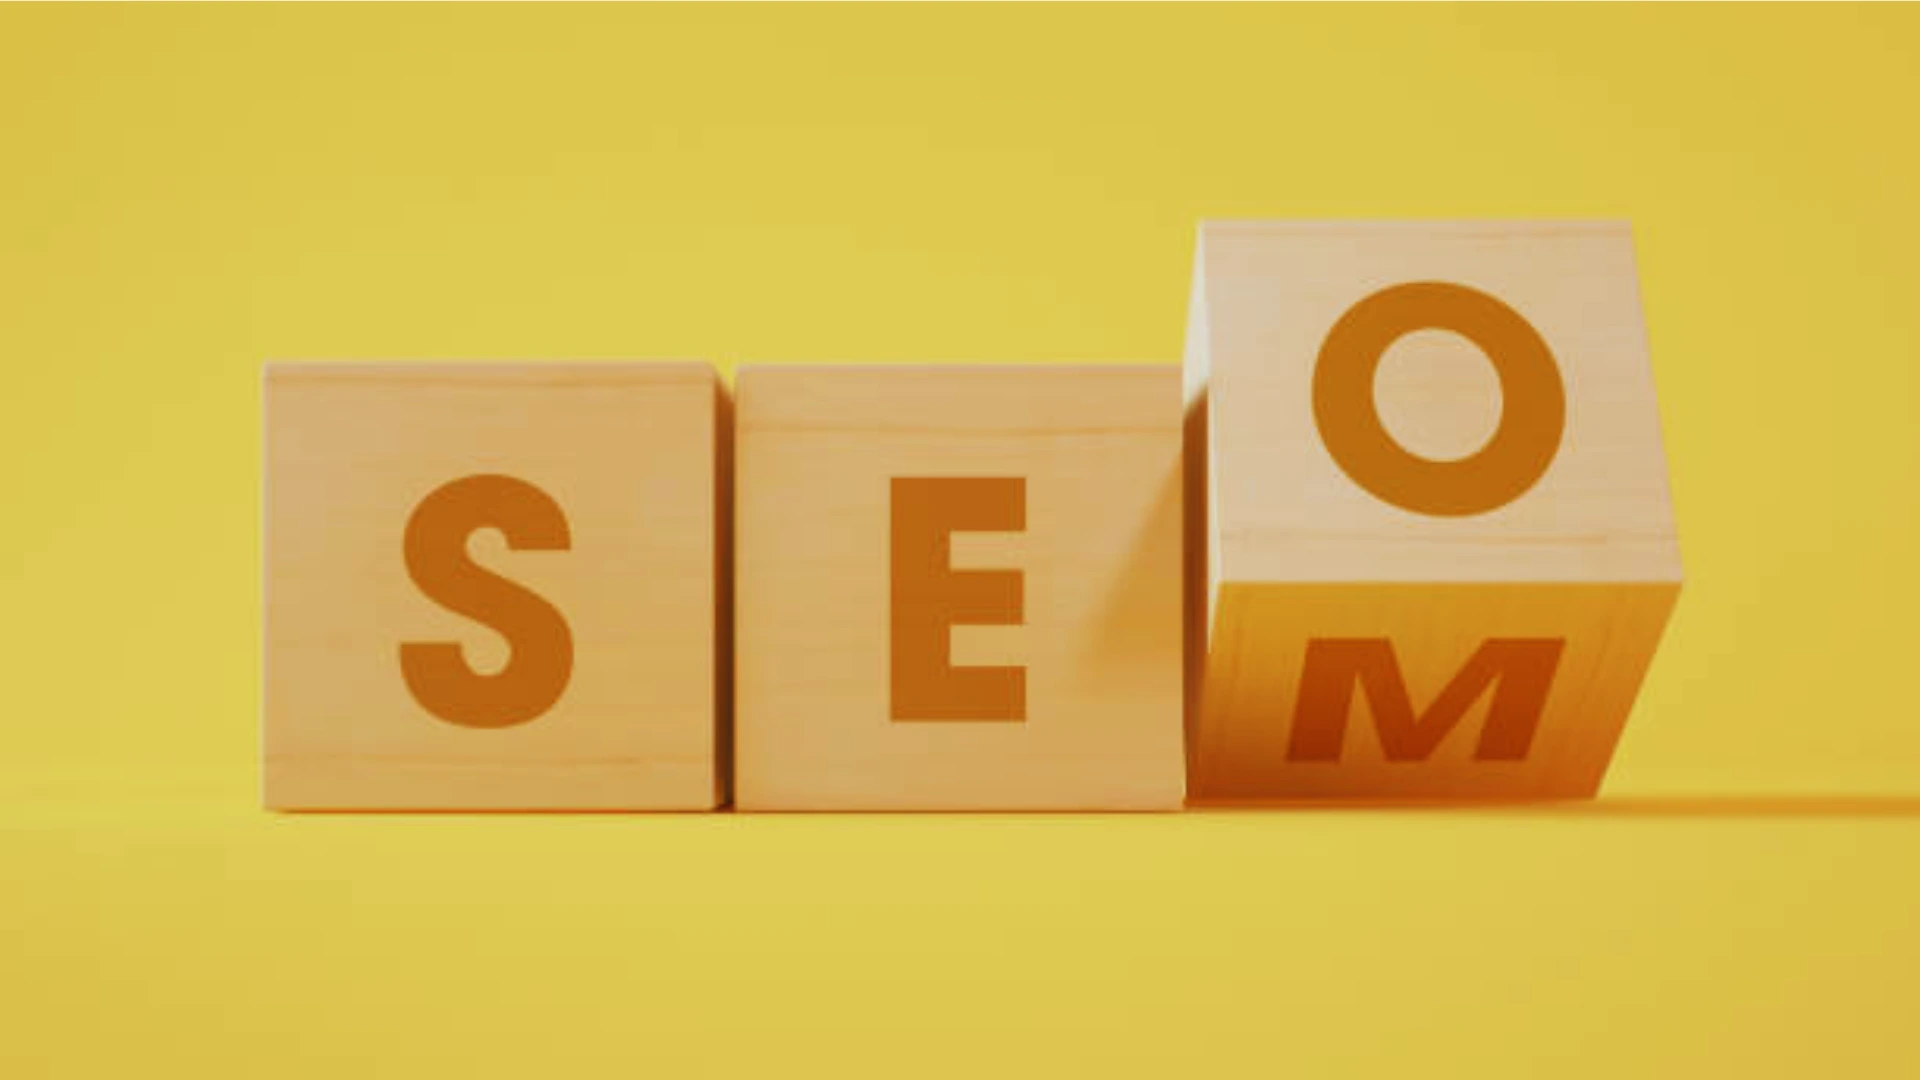 SEO vs SEM: What’s the Difference and Which is Better for Your Career?